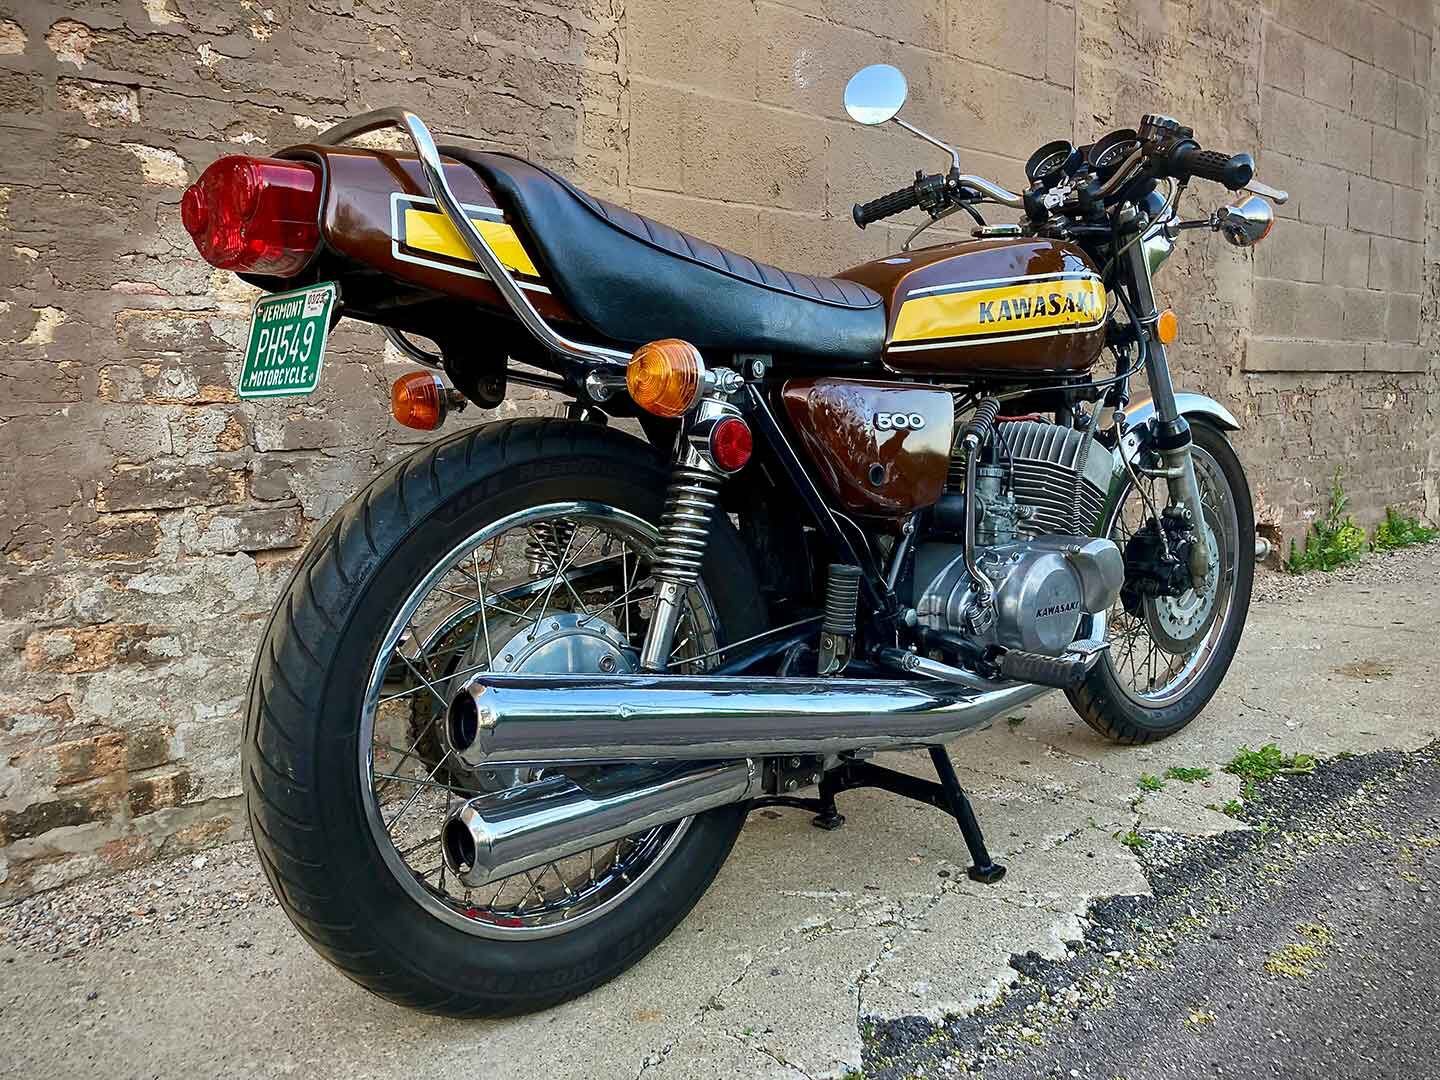 The 1975 Kawasaki H1F, in glorious poop-brown and caution tape yellow. Officially, the colors were “Candy Brown” and/or “Candy Yellow,” depending on your source.